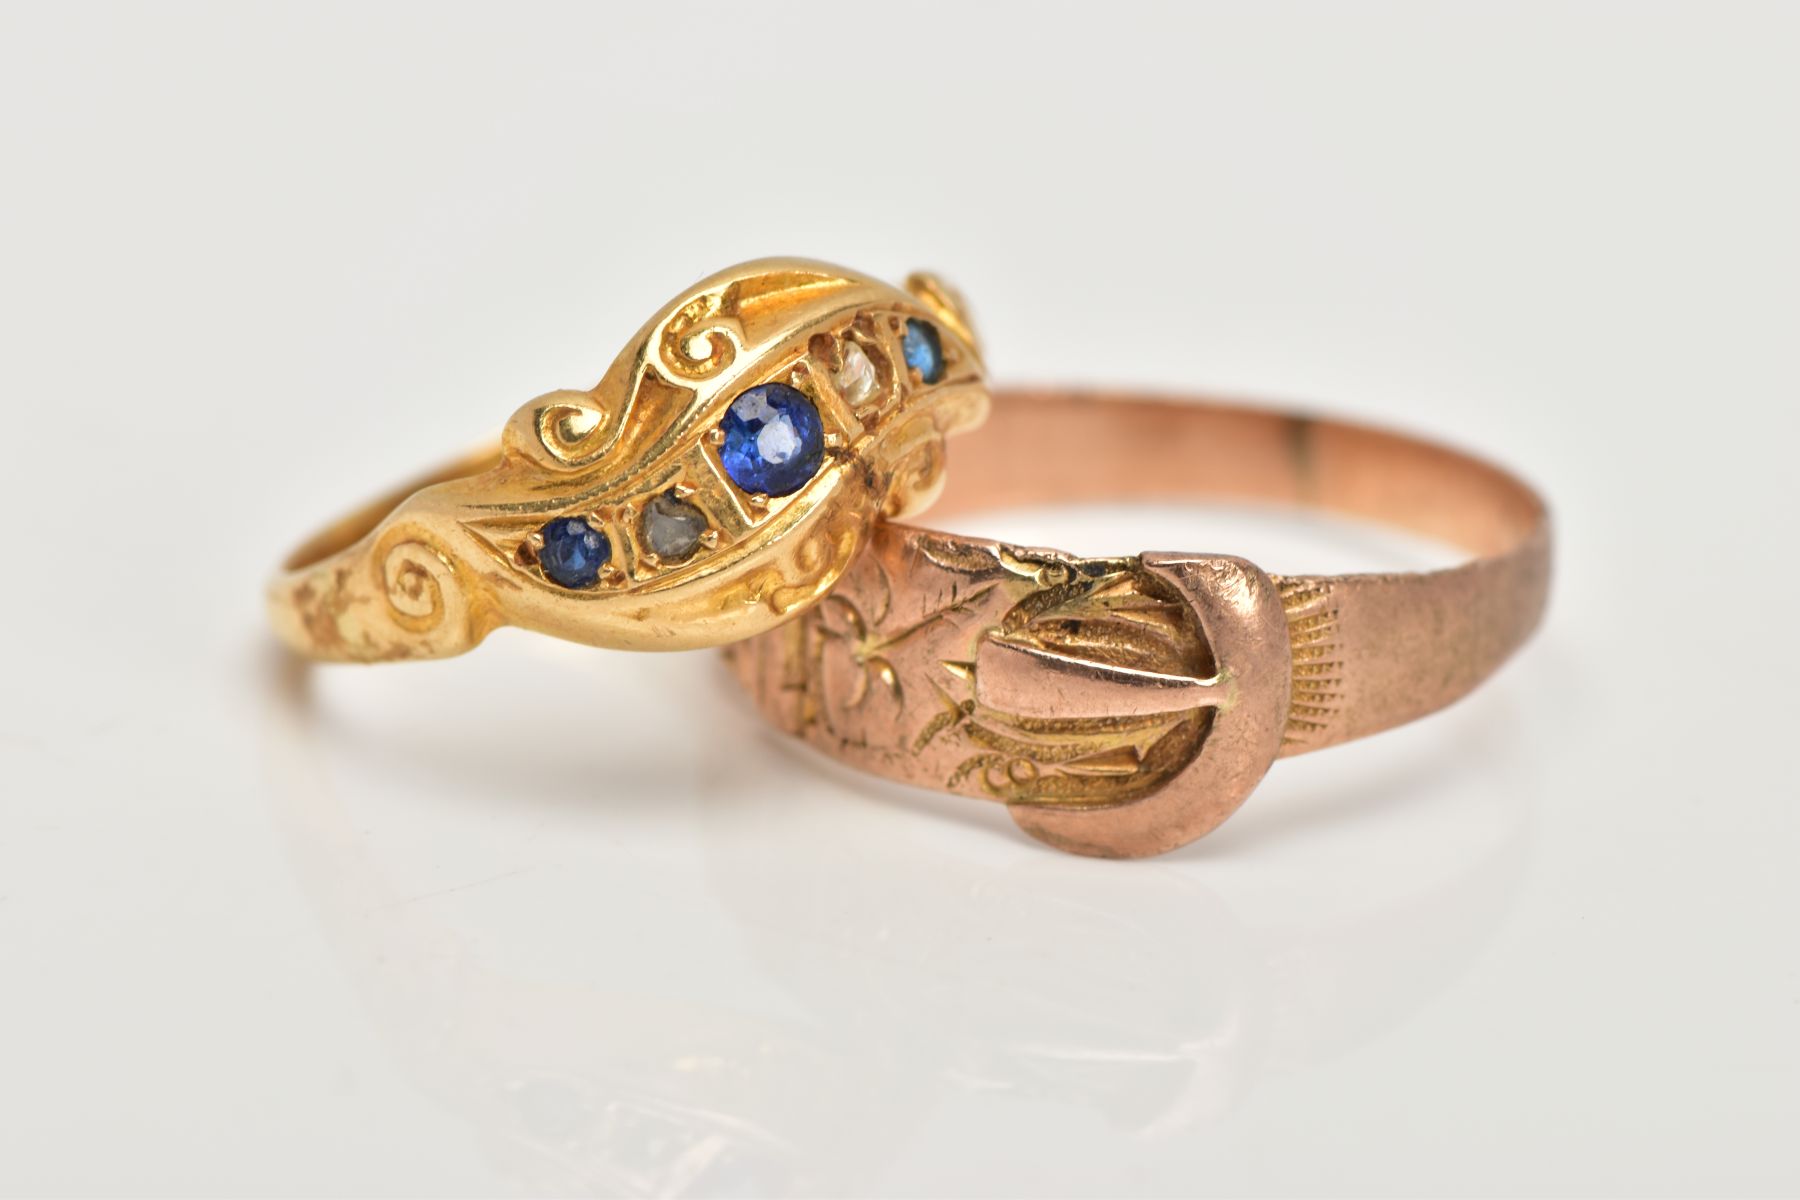 TWO EARLY 20TH CENTURY GOLD RINGS, the first designed as a curved row of two graduated circular